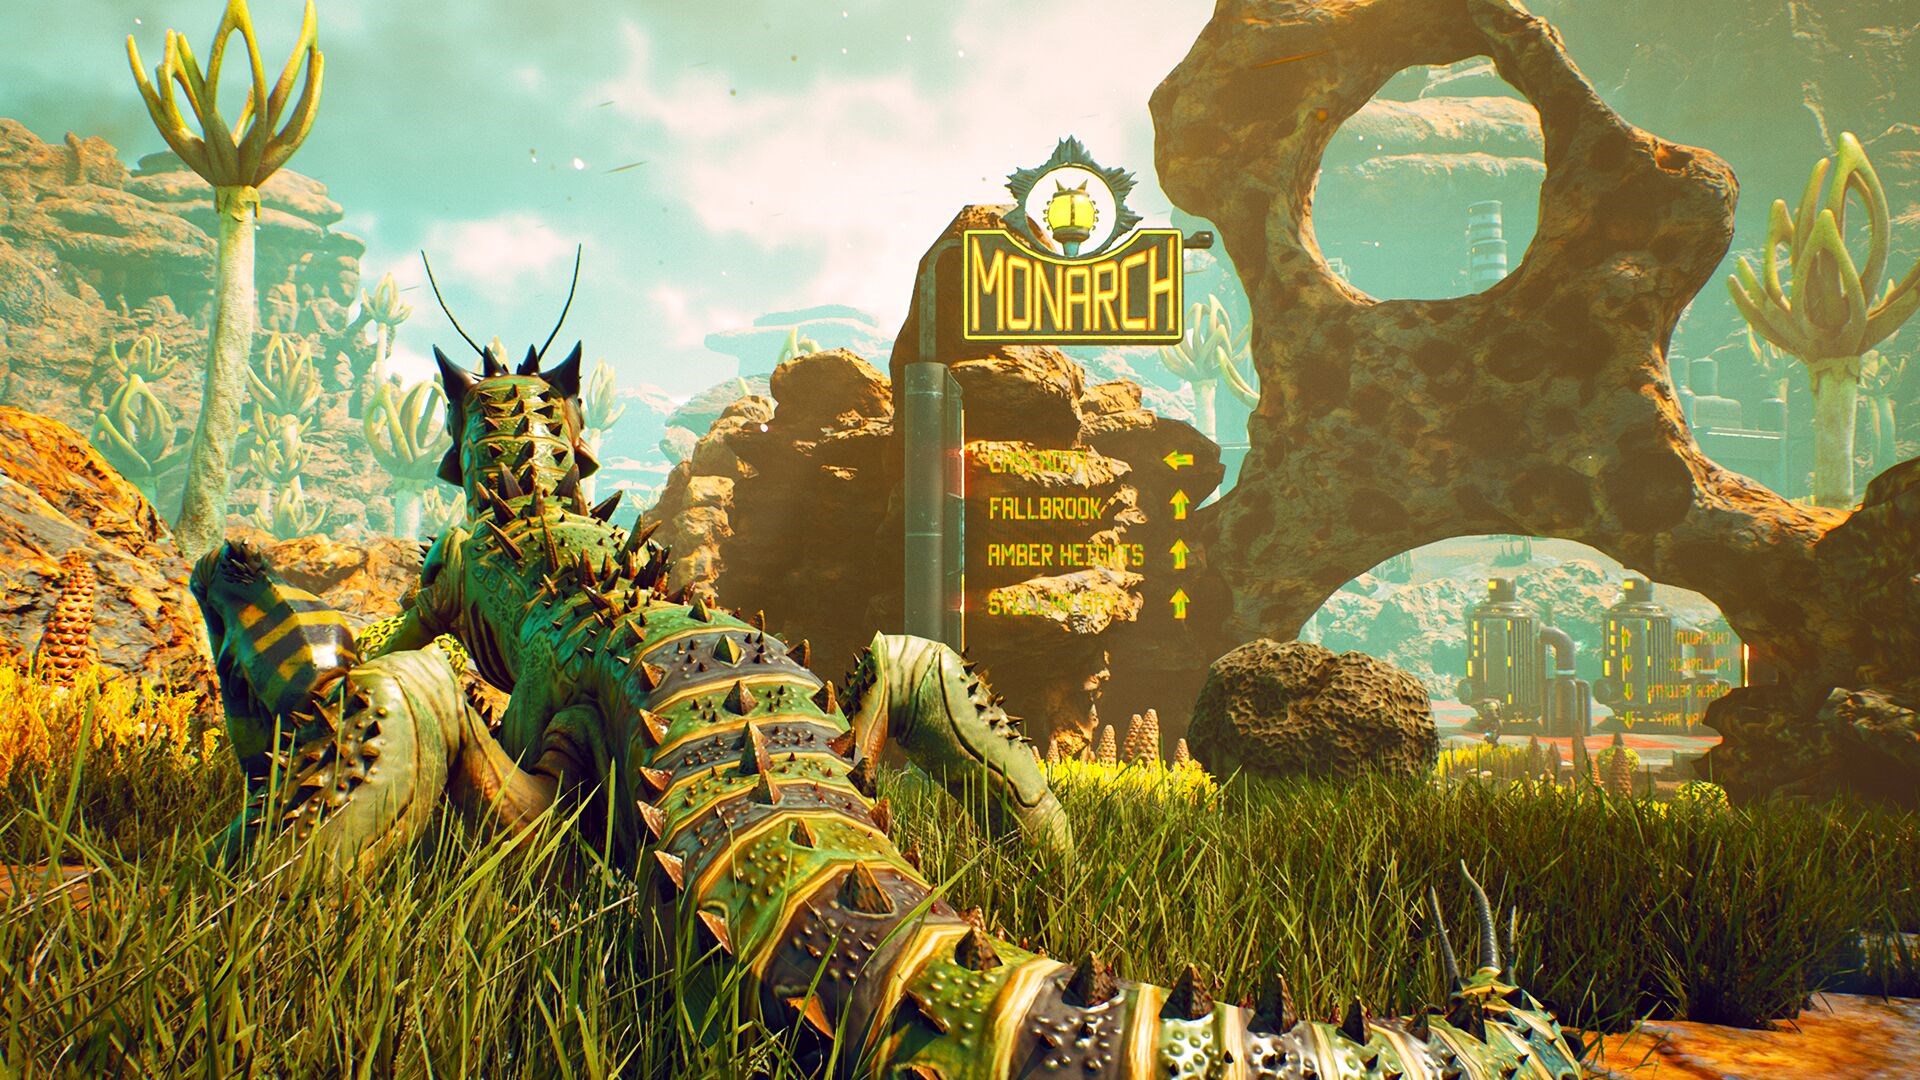 outer worlds on microsoft store